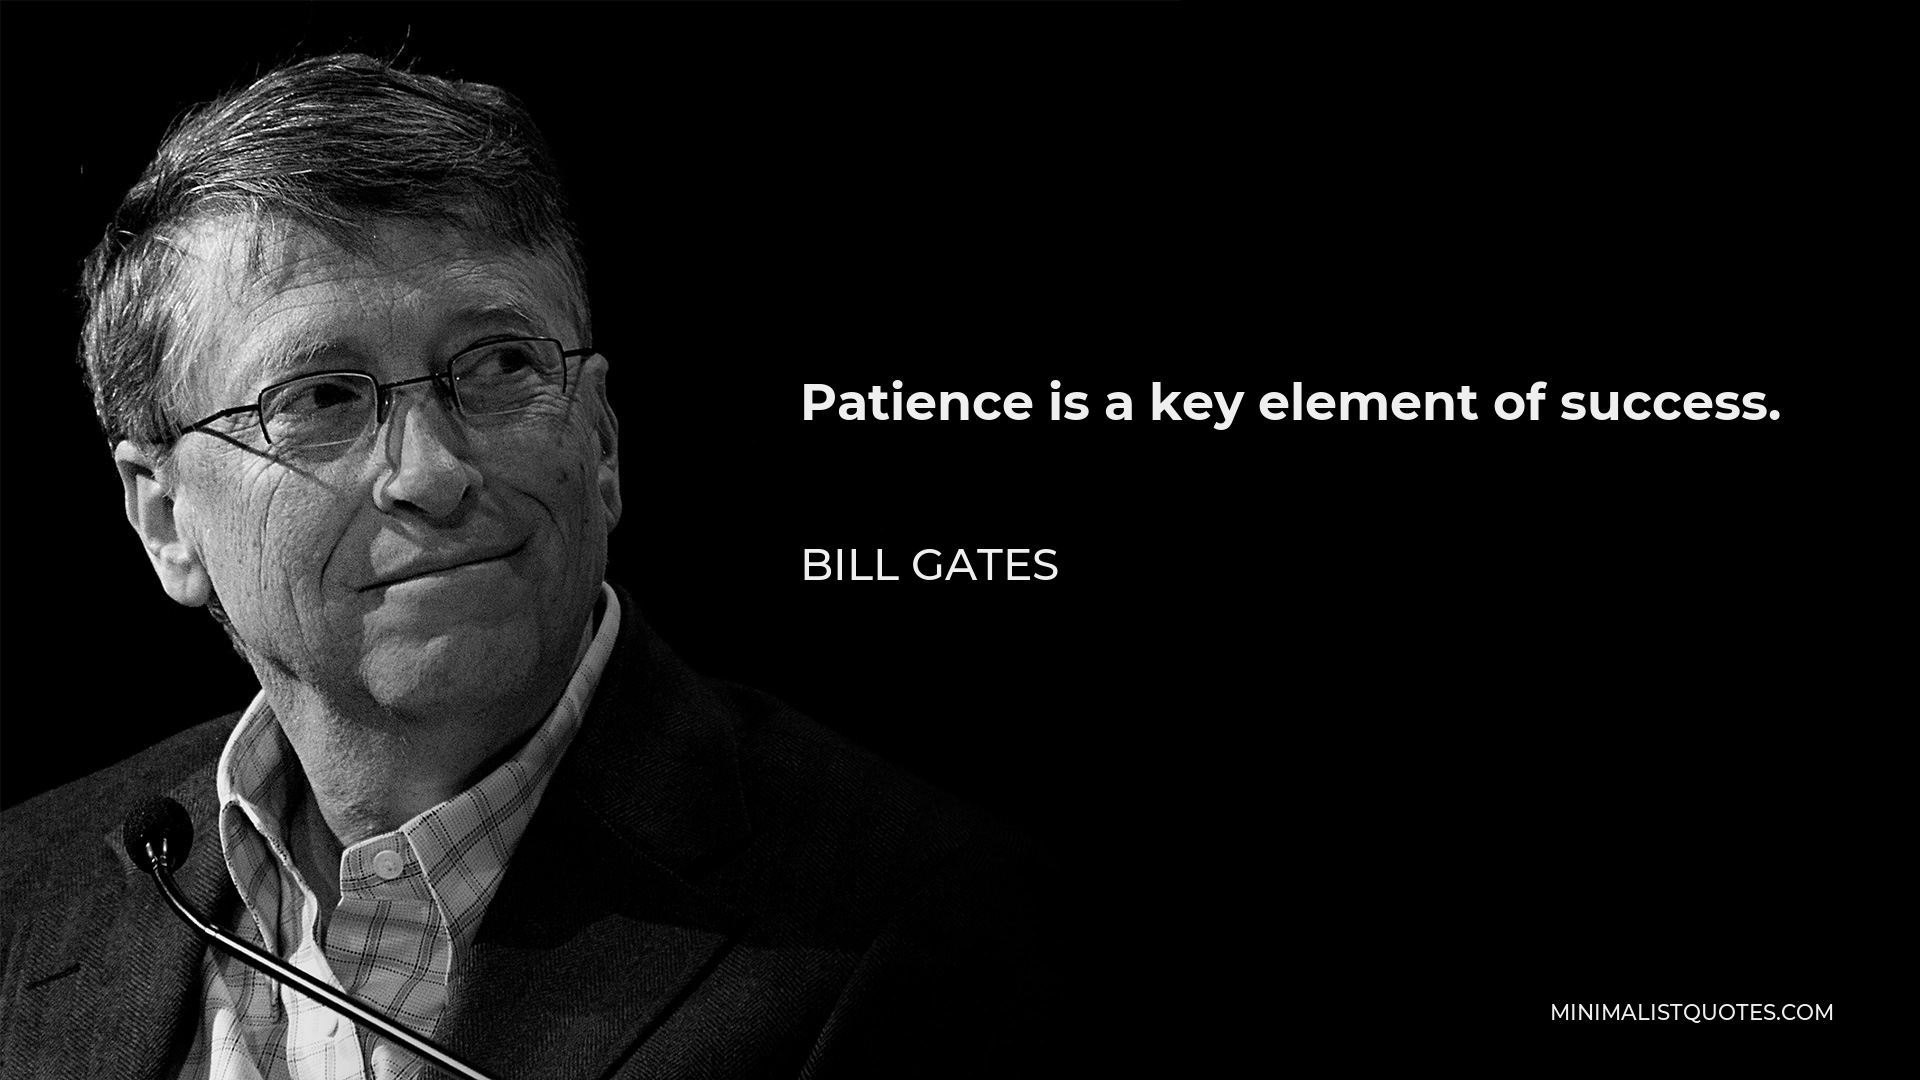 Bill Gates Quote - Patience is a key element of success.